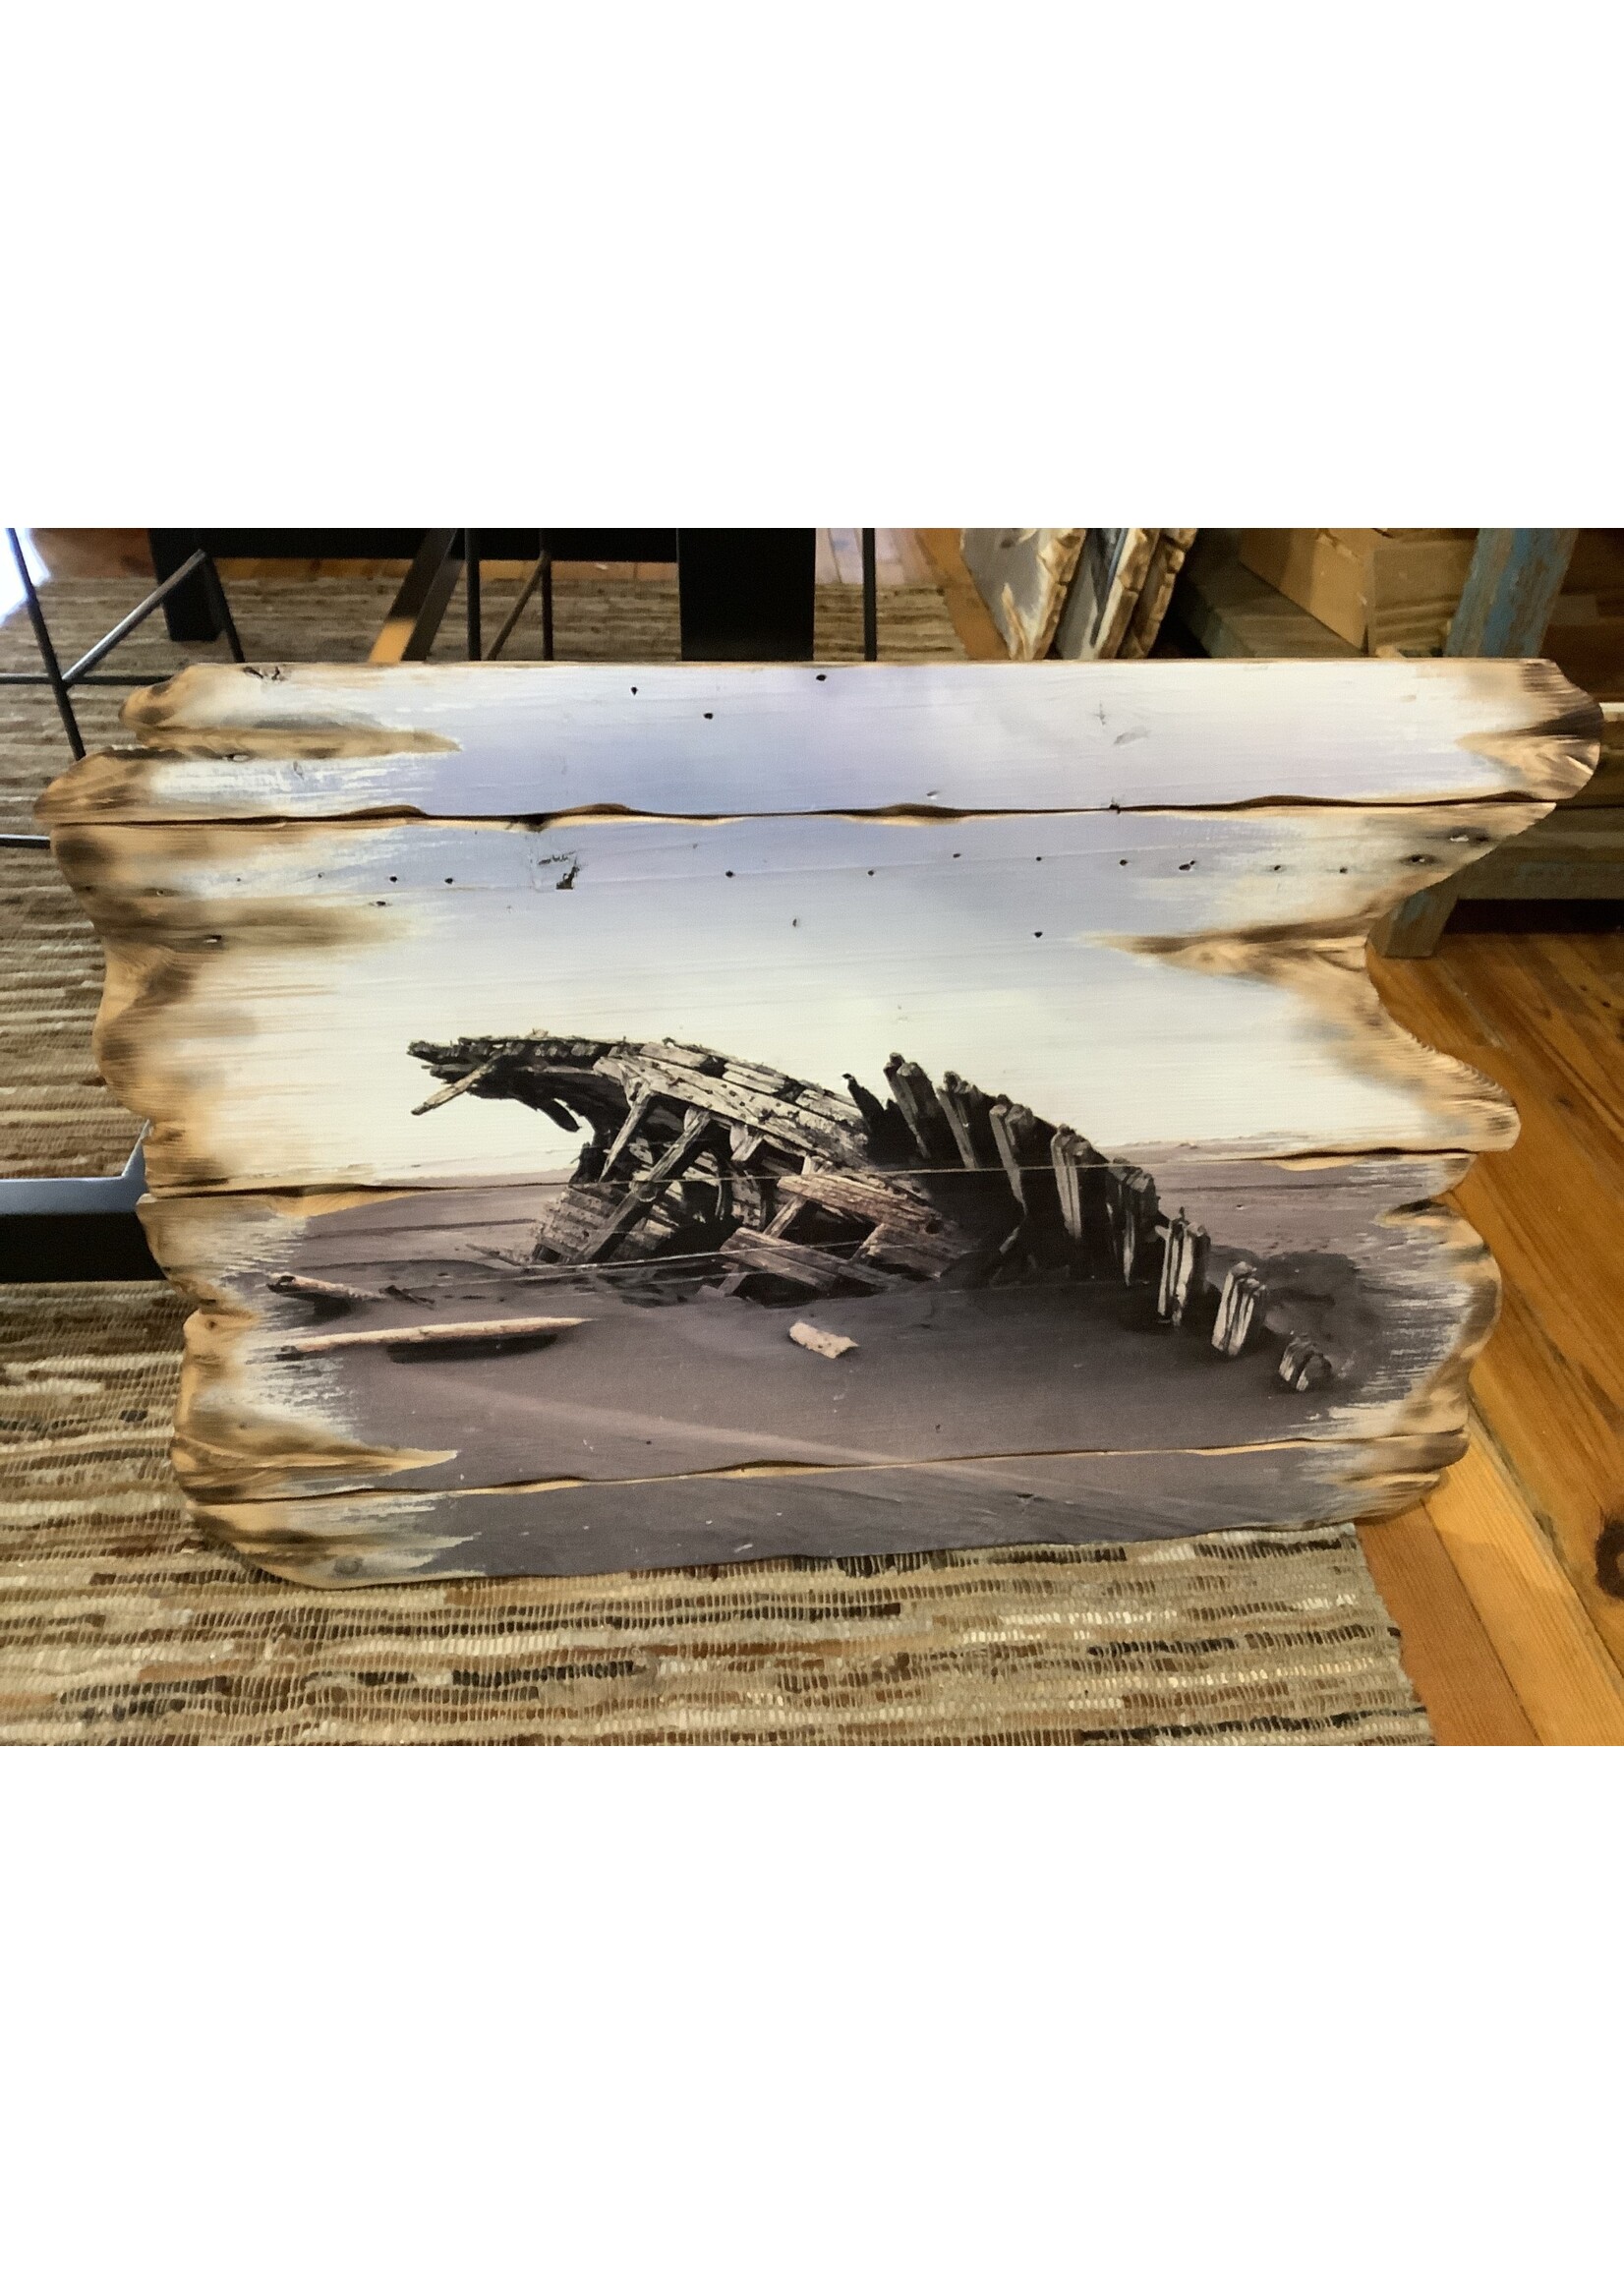 Old Wood Delaware OW Shipwreck on Beach - Burned Plank Art 36x24